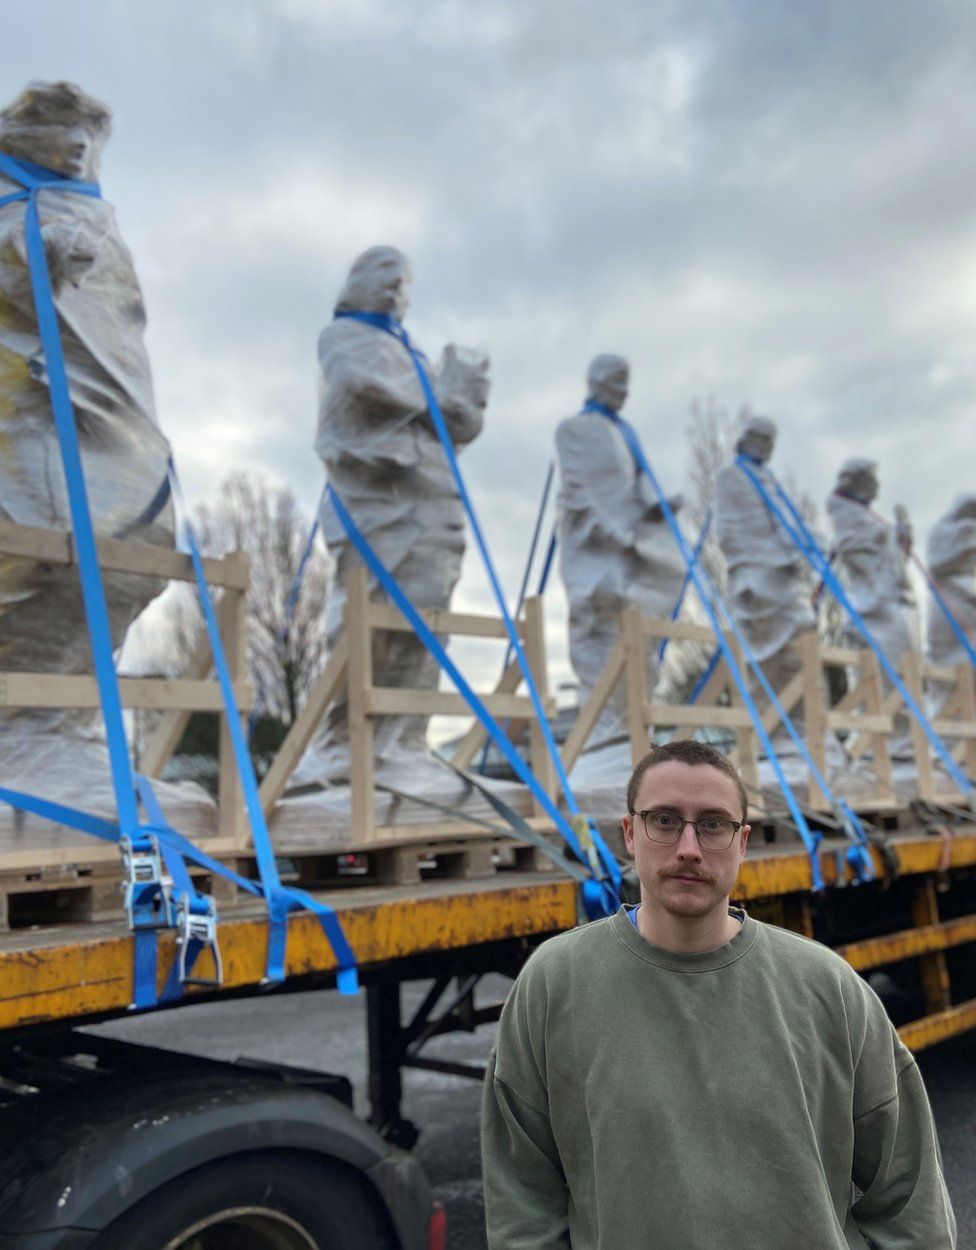 Sculptor David J Mitchell with statues on truck in background